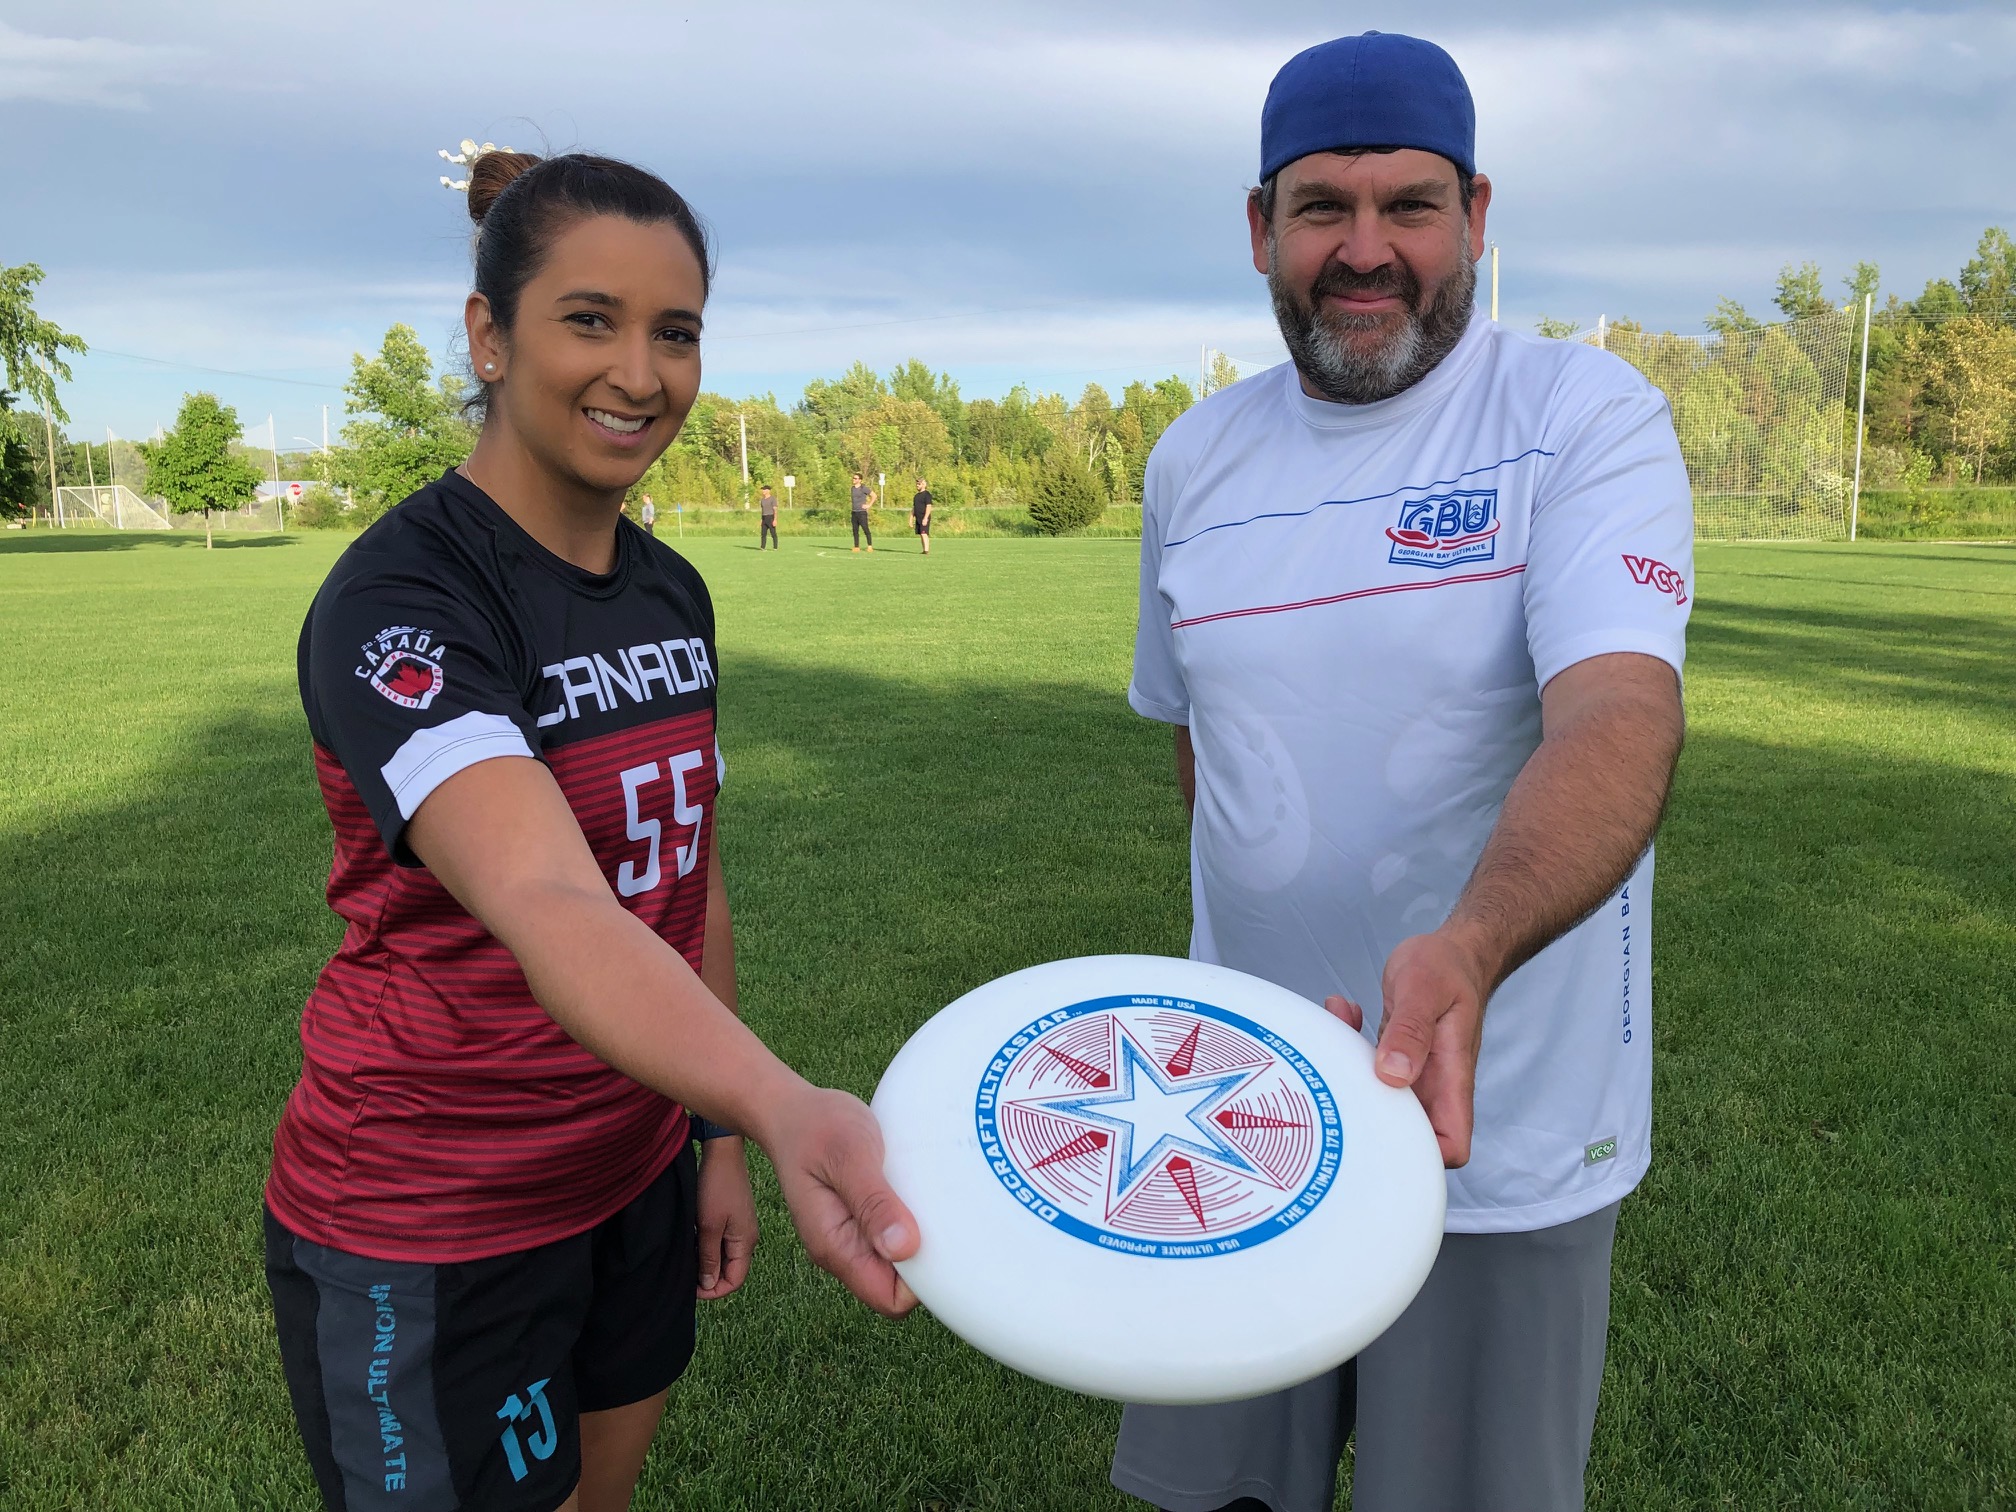 Two Collingwood athletes headed world frisbee games - Collingwood